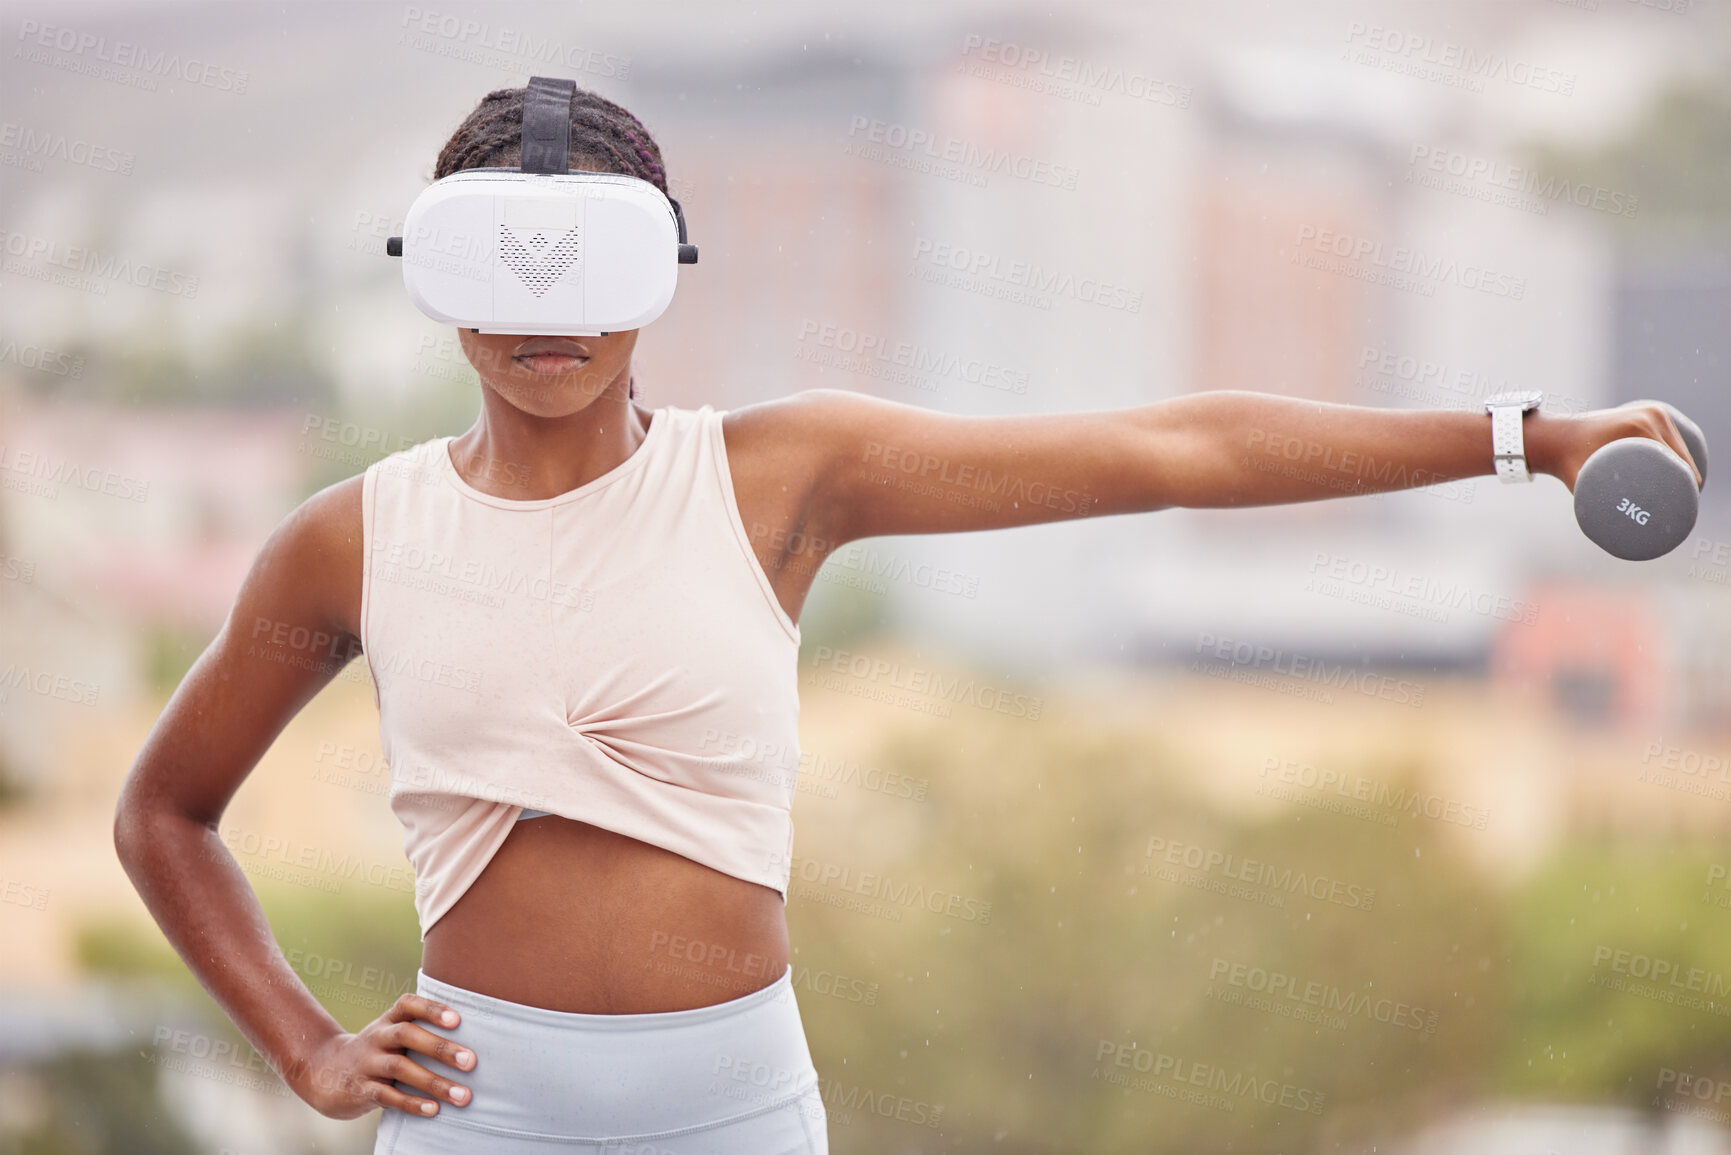 Buy stock photo Virtual reality, fitness or black woman with a dumbbell, vr or 3d headset for a gaming experience with exercise. Metaverse, gamer or sports girl gaming or training in futuristic ai digital technology